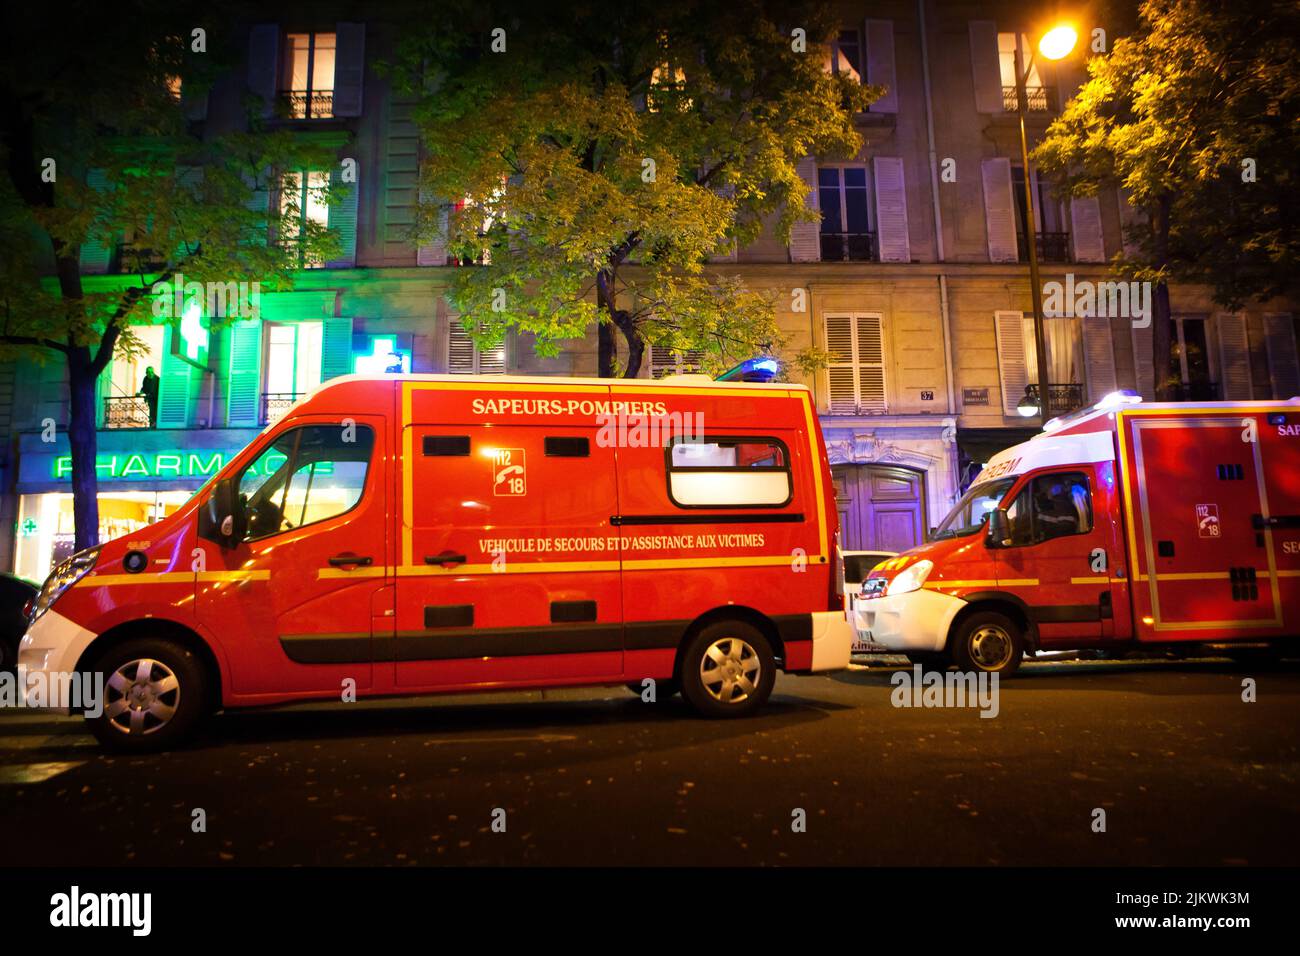 Resuscitation ambulance intervening in the event of vital distress such as cardiac arrest. Stock Photo